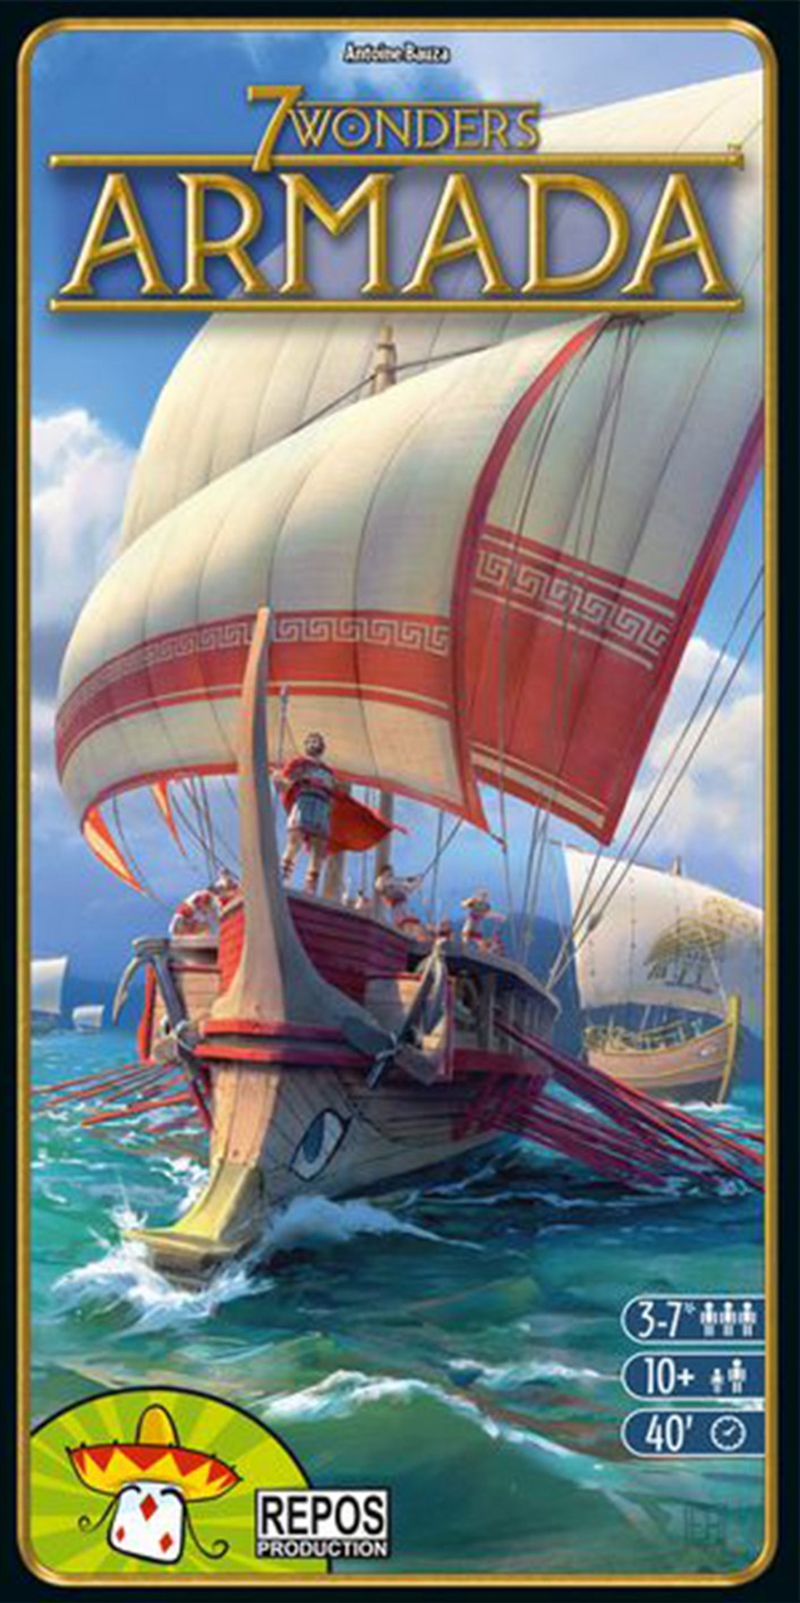 7 Wonders Armada Expansion/Product Detail/Board Games